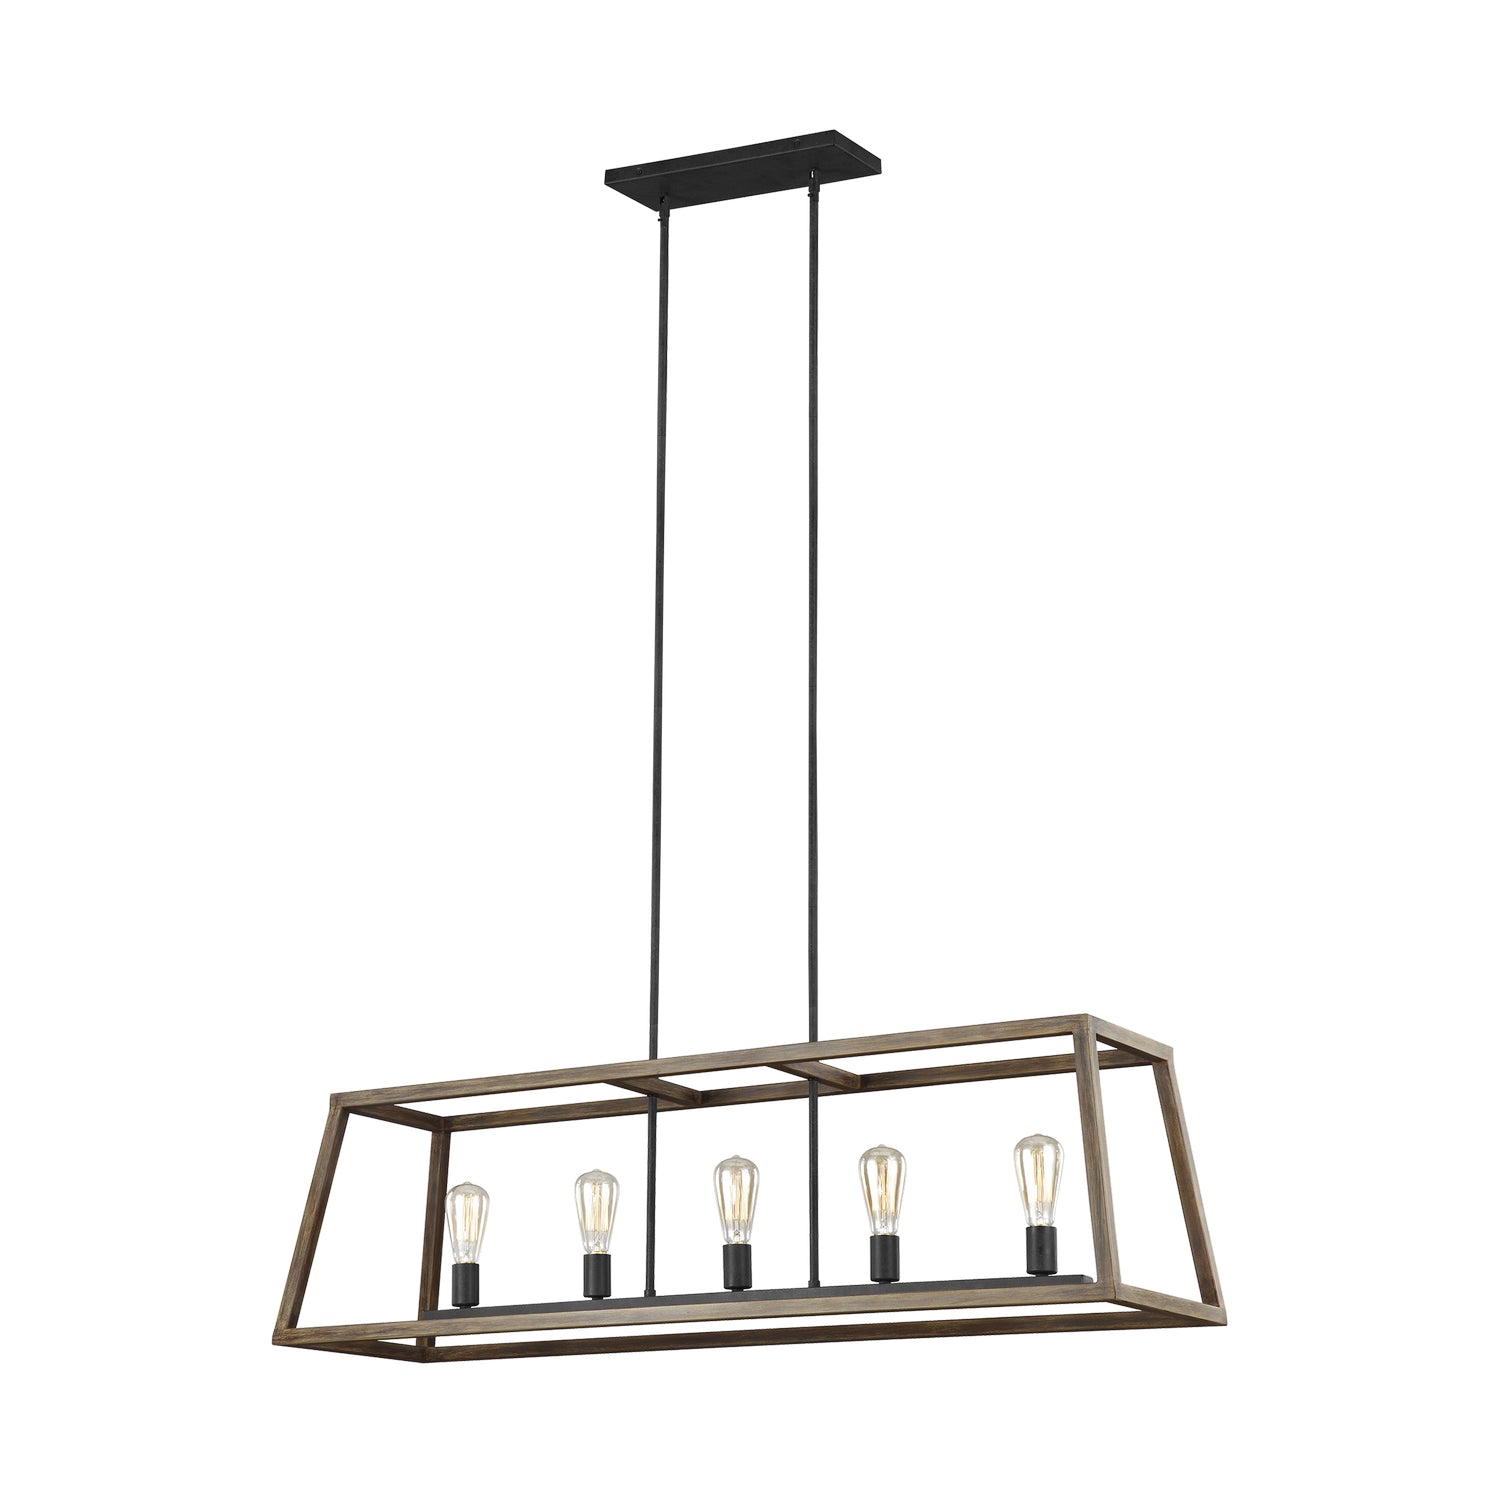 Visual Comfort Studio Canada - F3193/5WOW/AF - Five Light Linear Chandelier - Gannet - Weathered Oak Wood / Antique Forged Iron